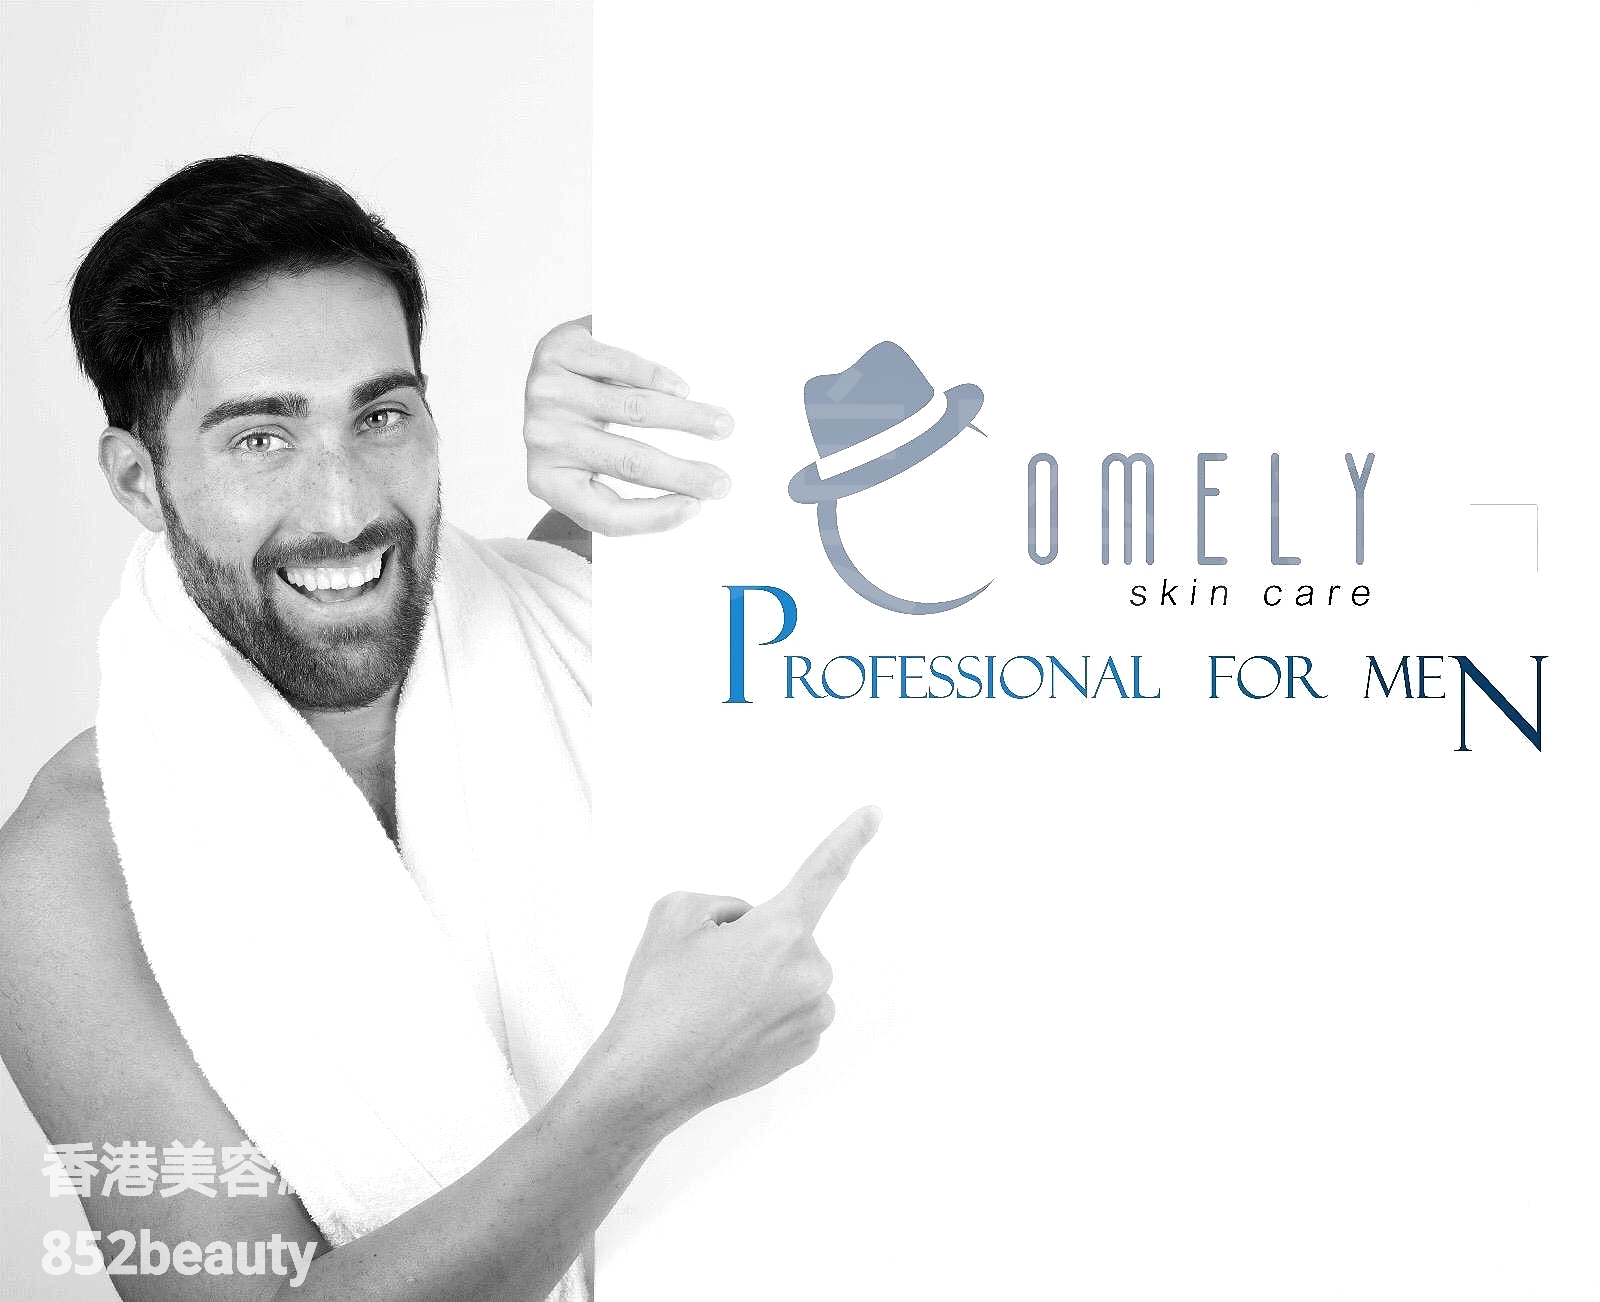 Men Grooming: COMELY skin care